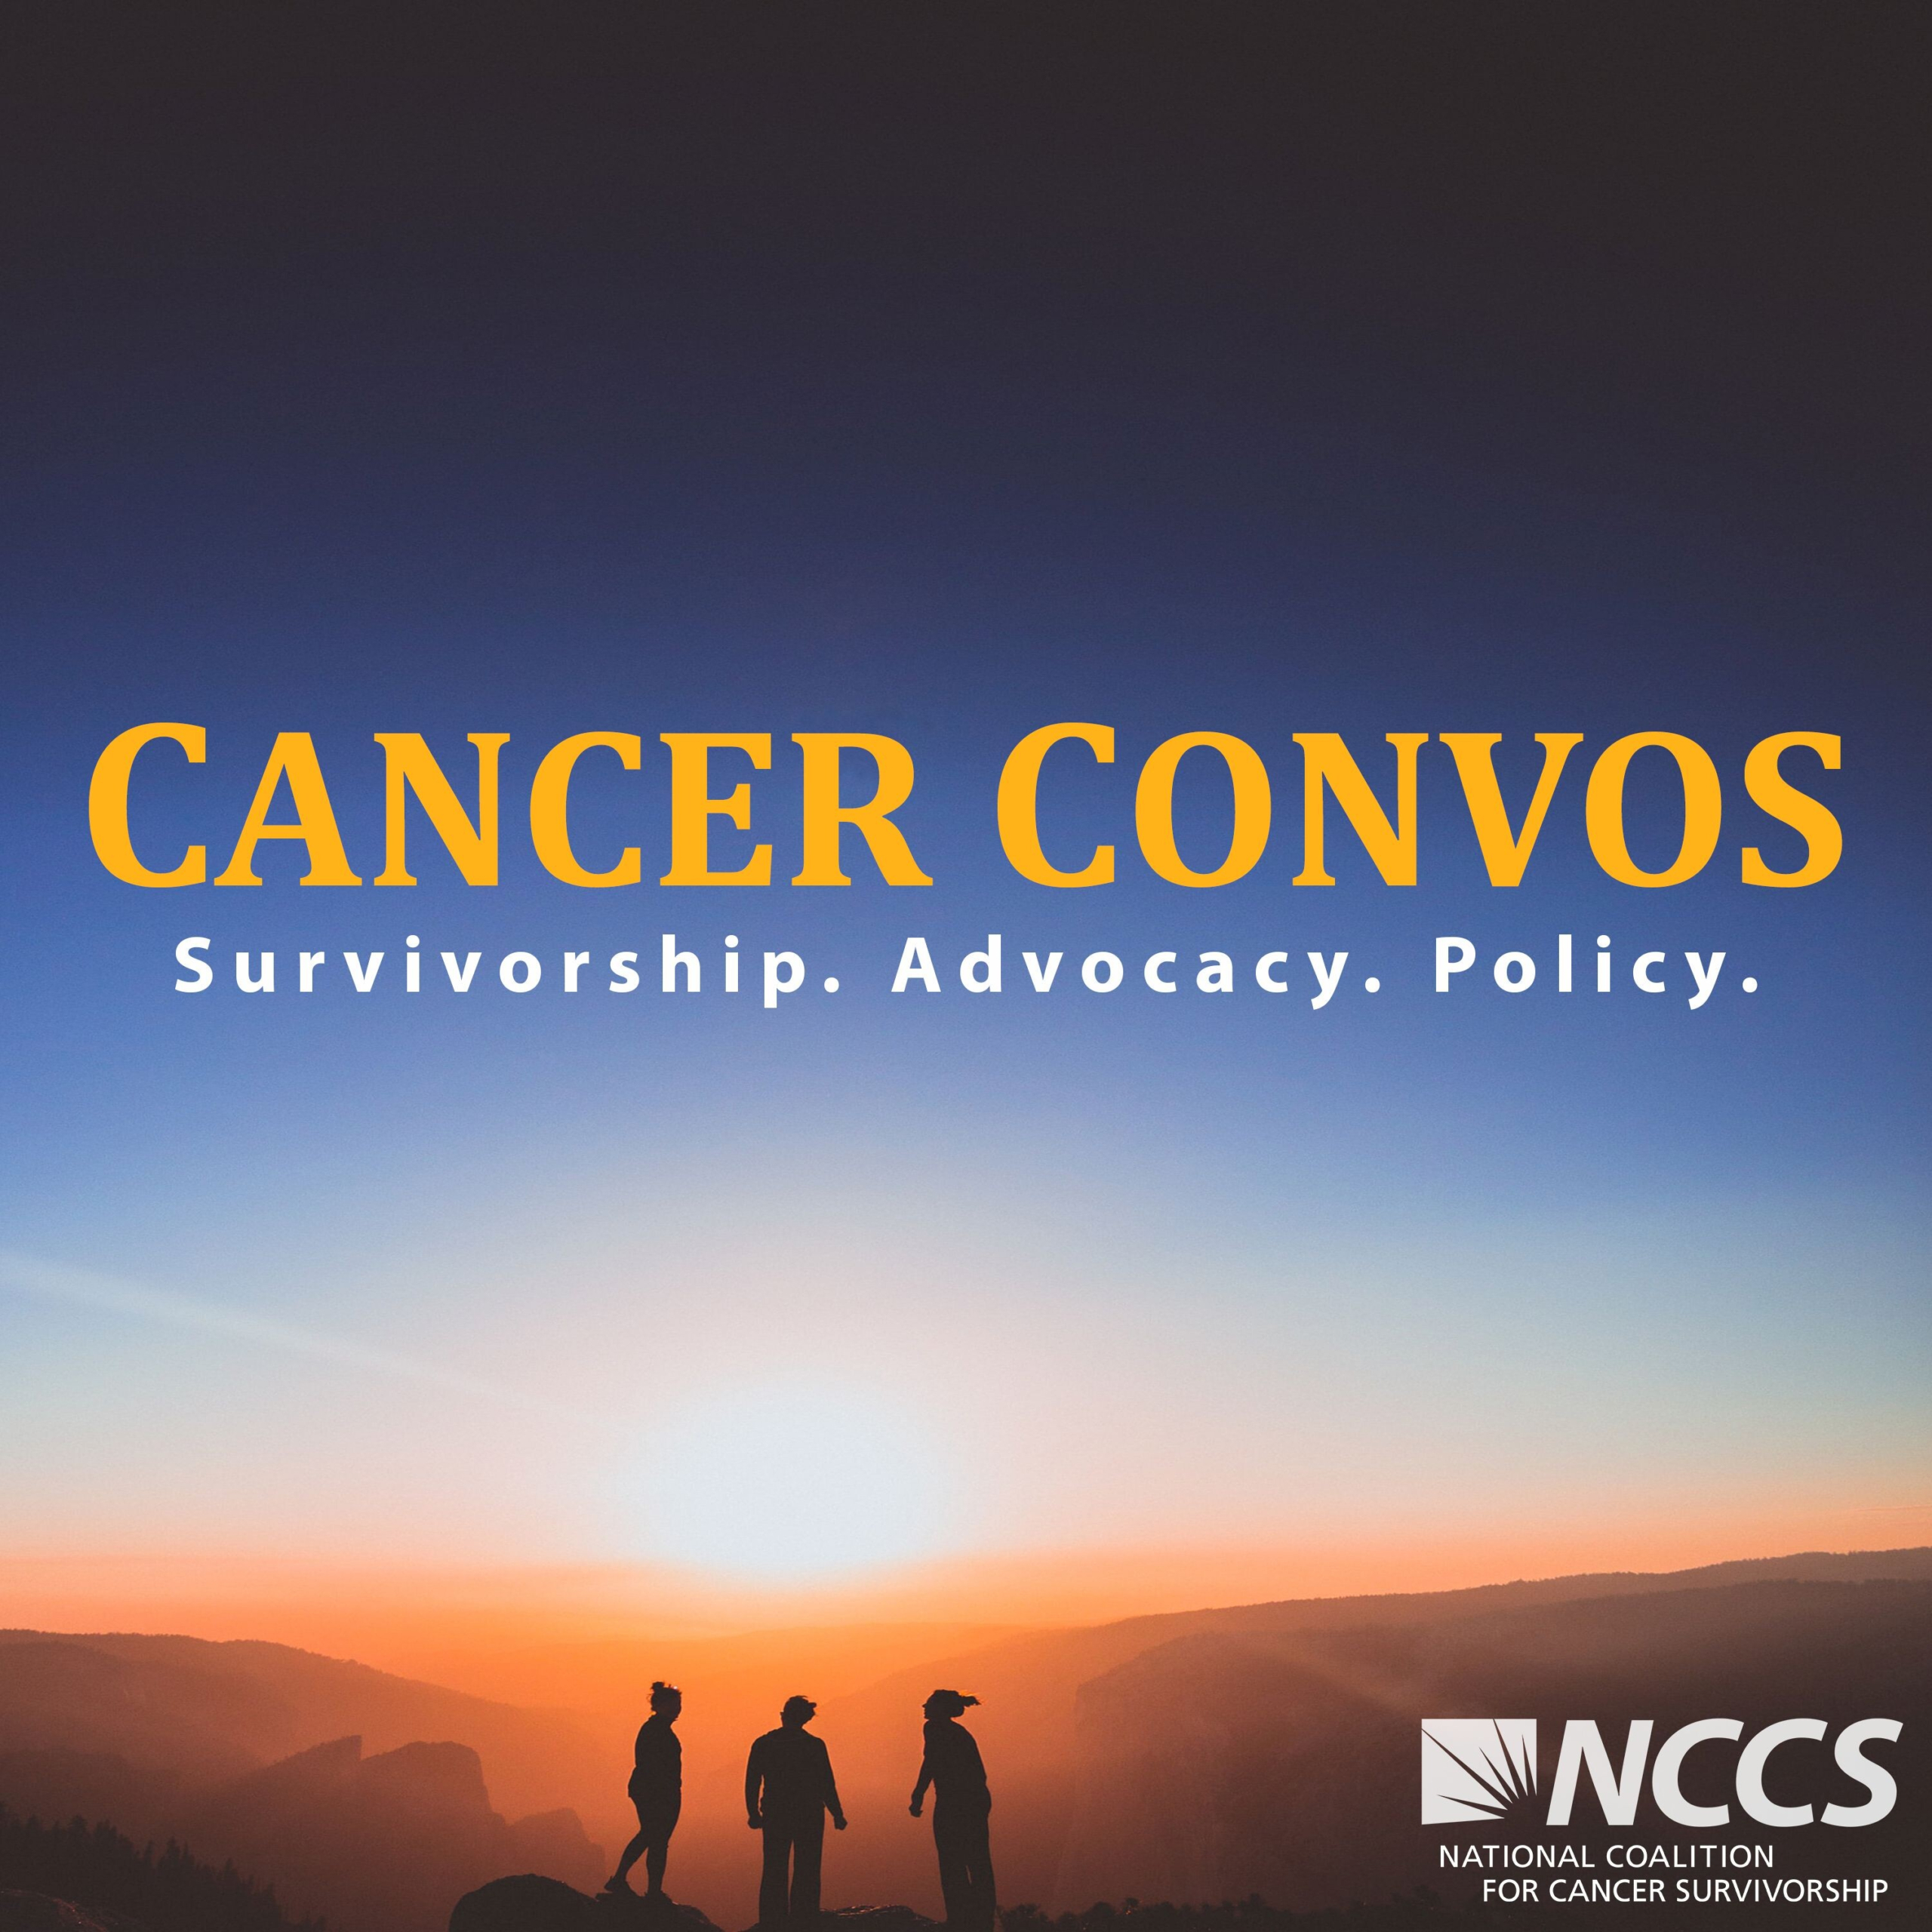 What legal and financial protections do cancer survivors have during a pandemic?